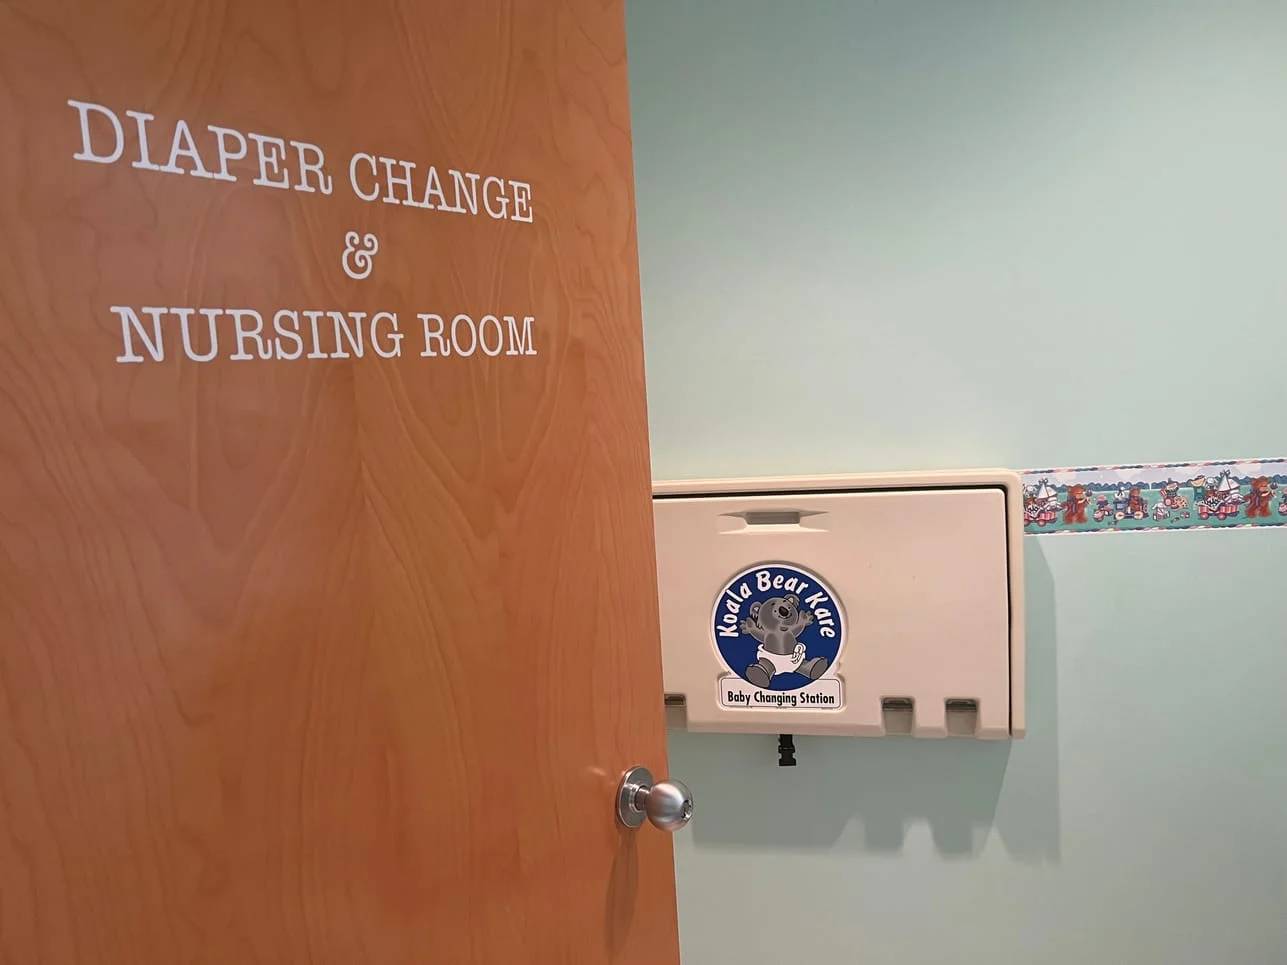 DIAPER CHANGING STATION